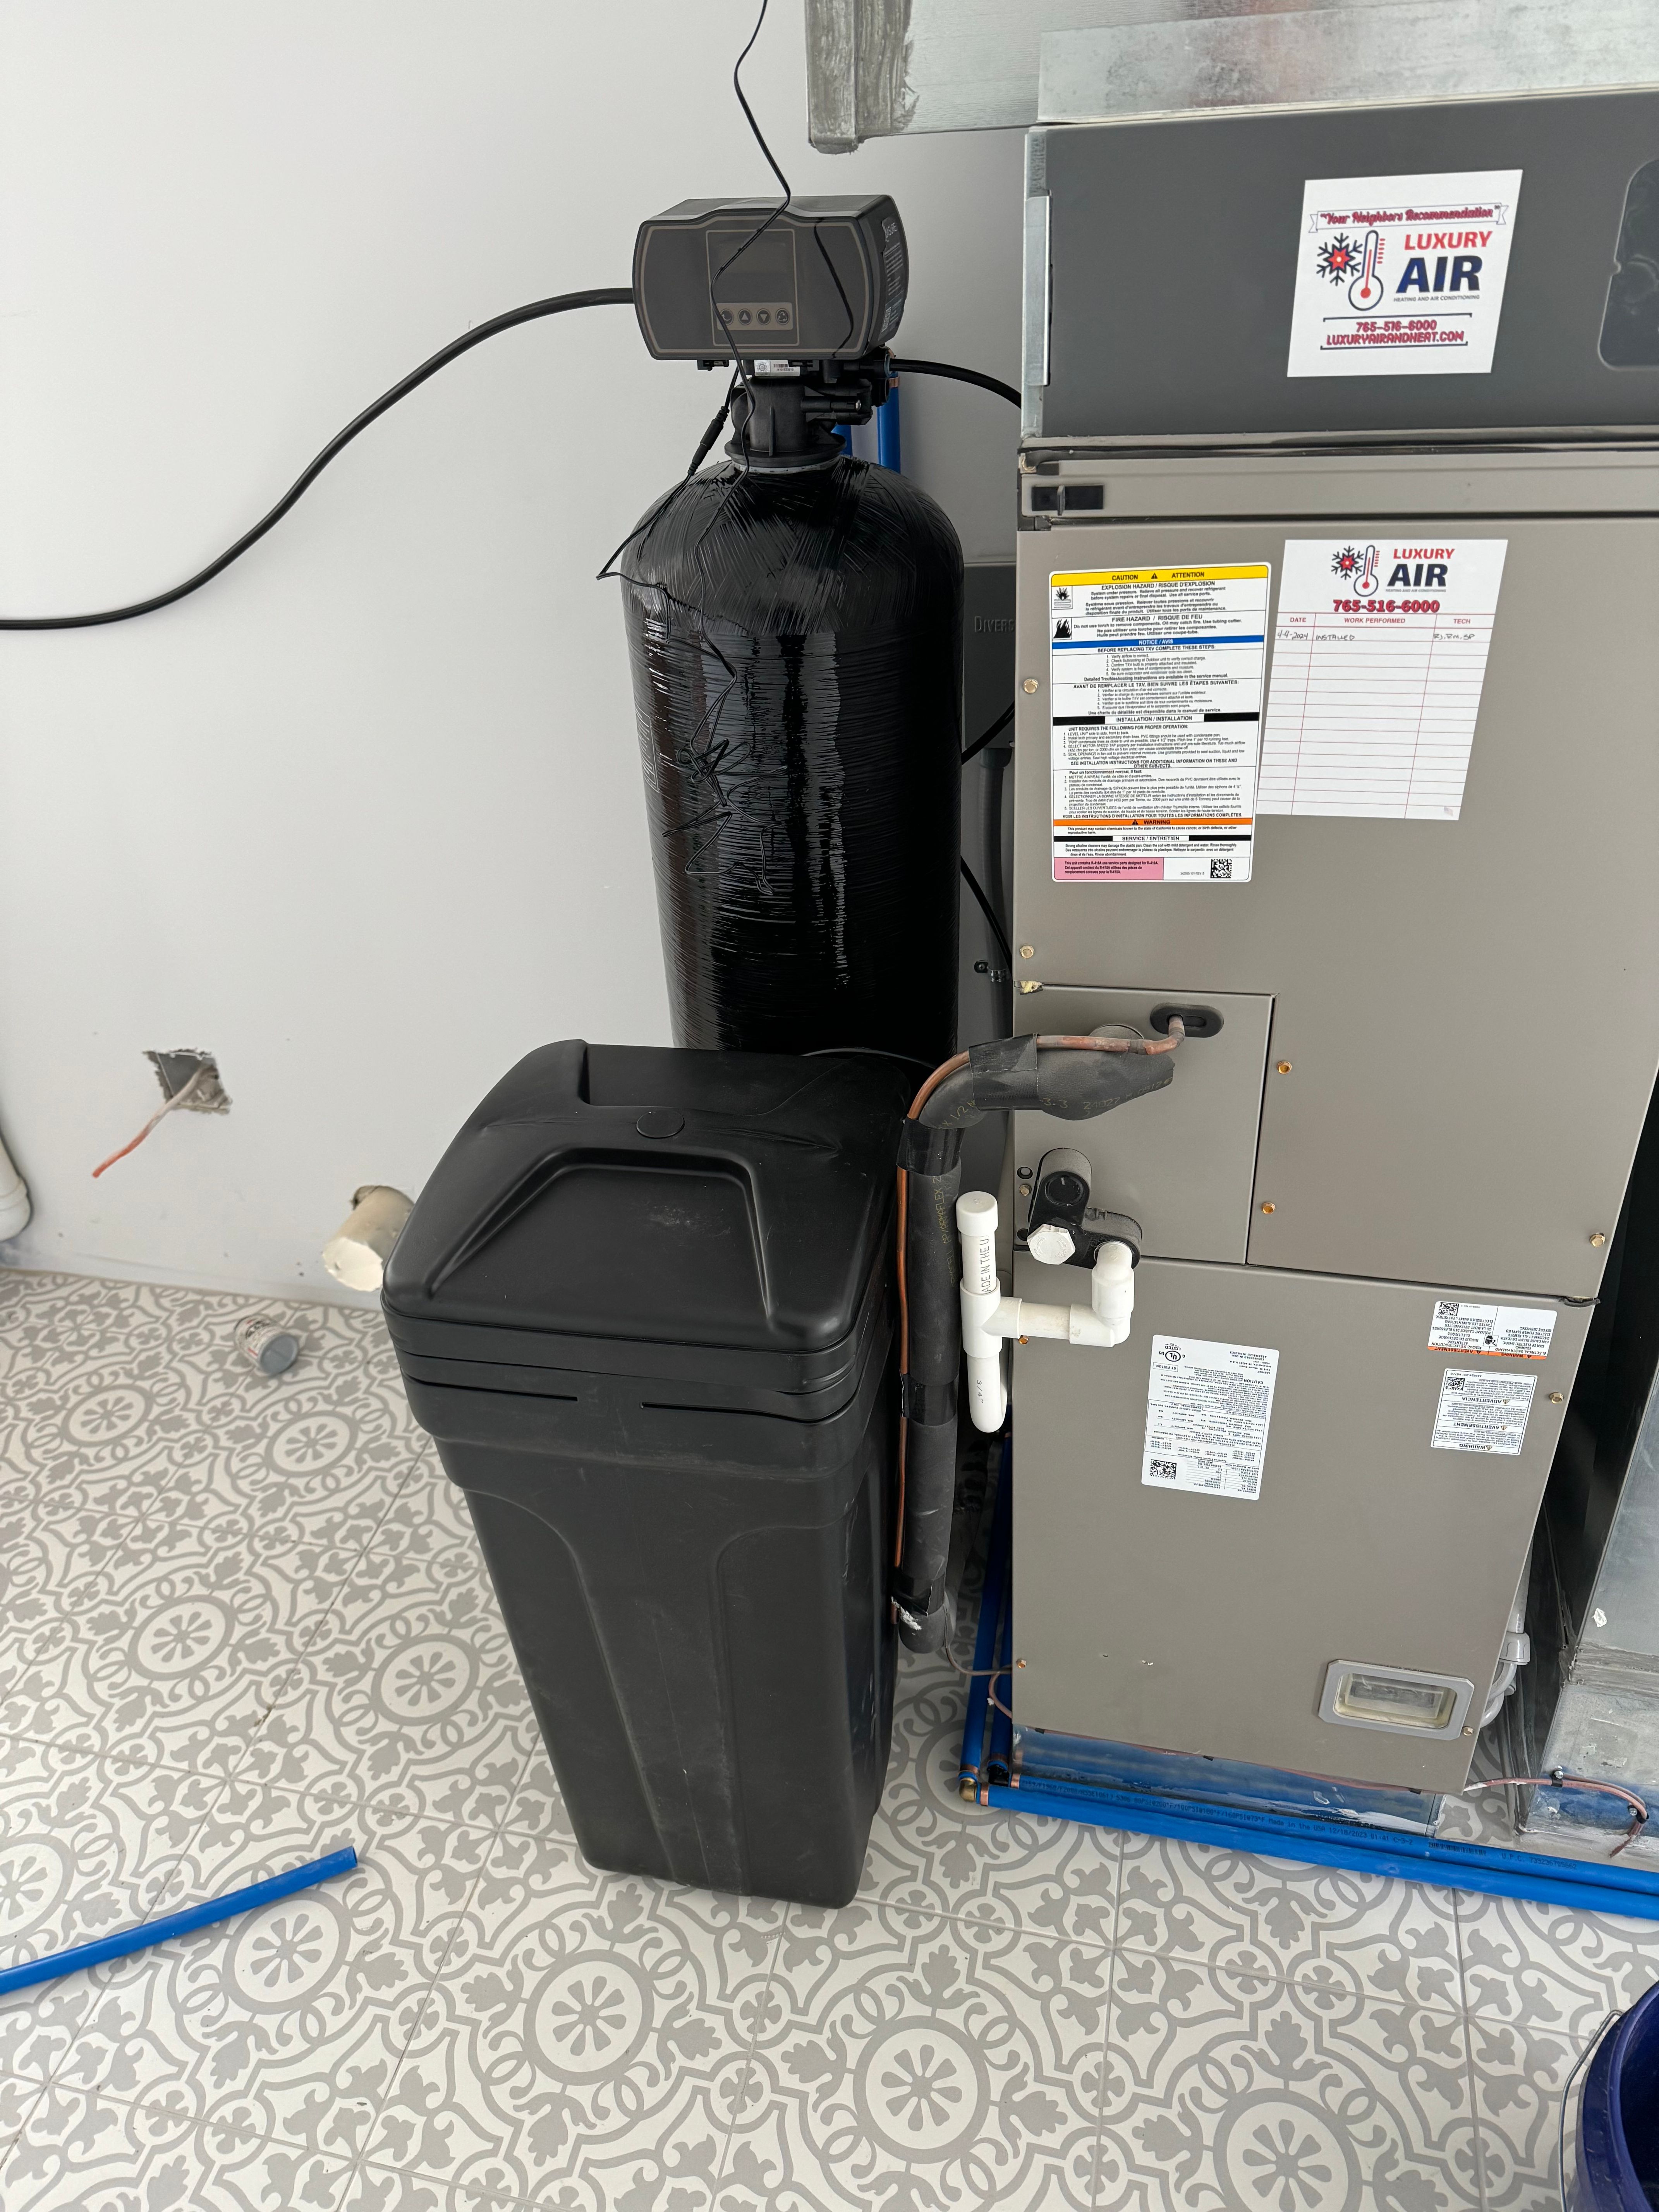 Water Softeners for Dutton Plumbing, Inc. in Whiteland, IN